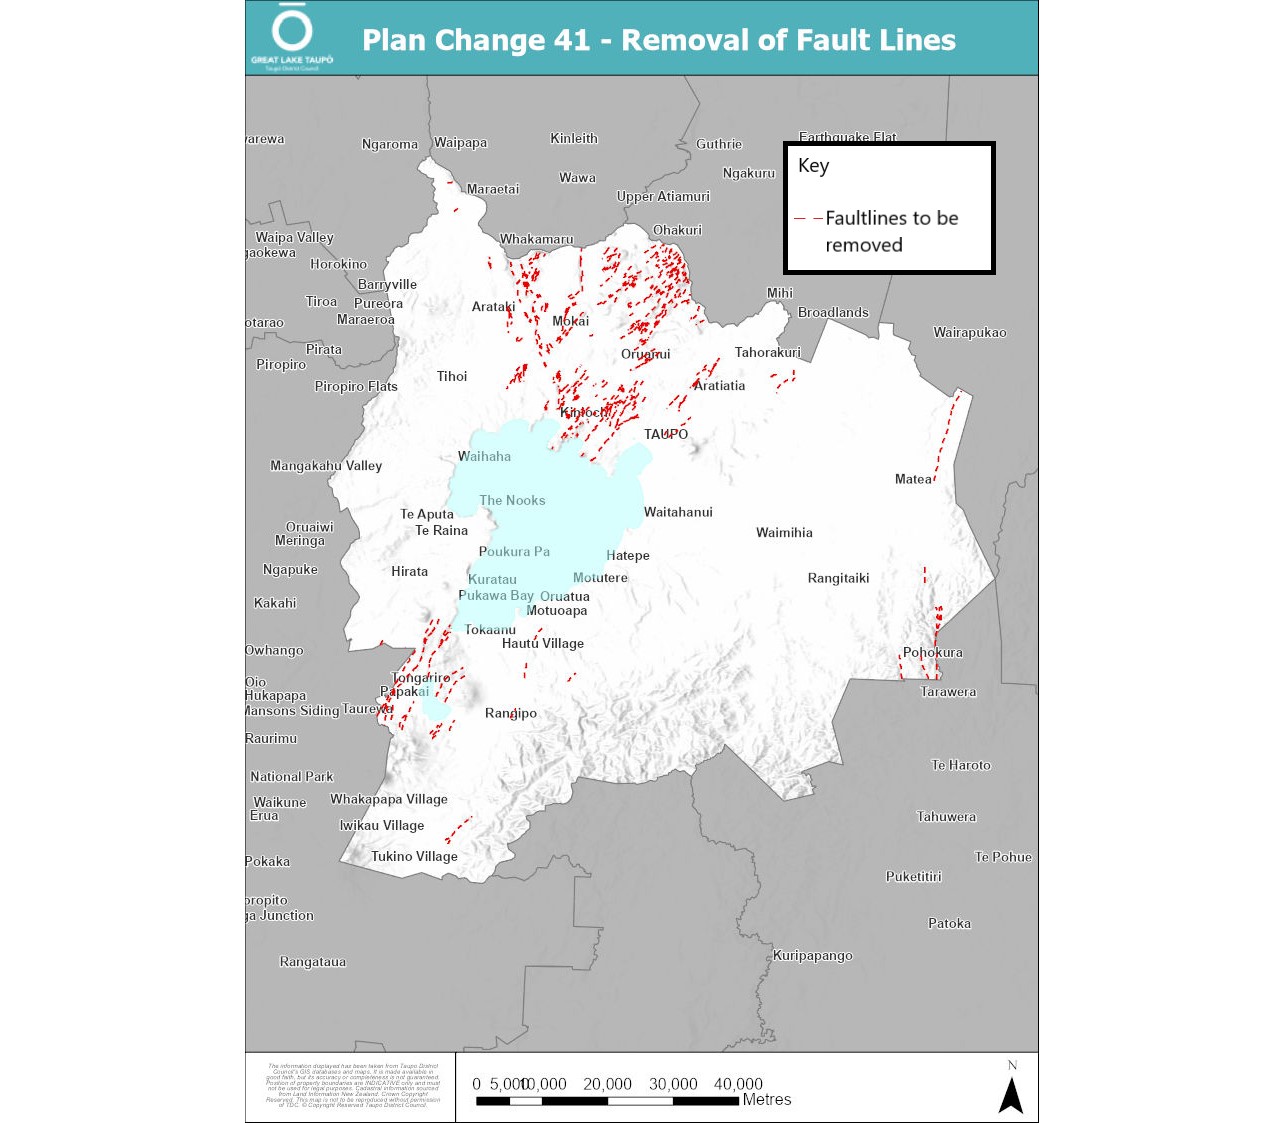 Map of fault lines to be removed.  